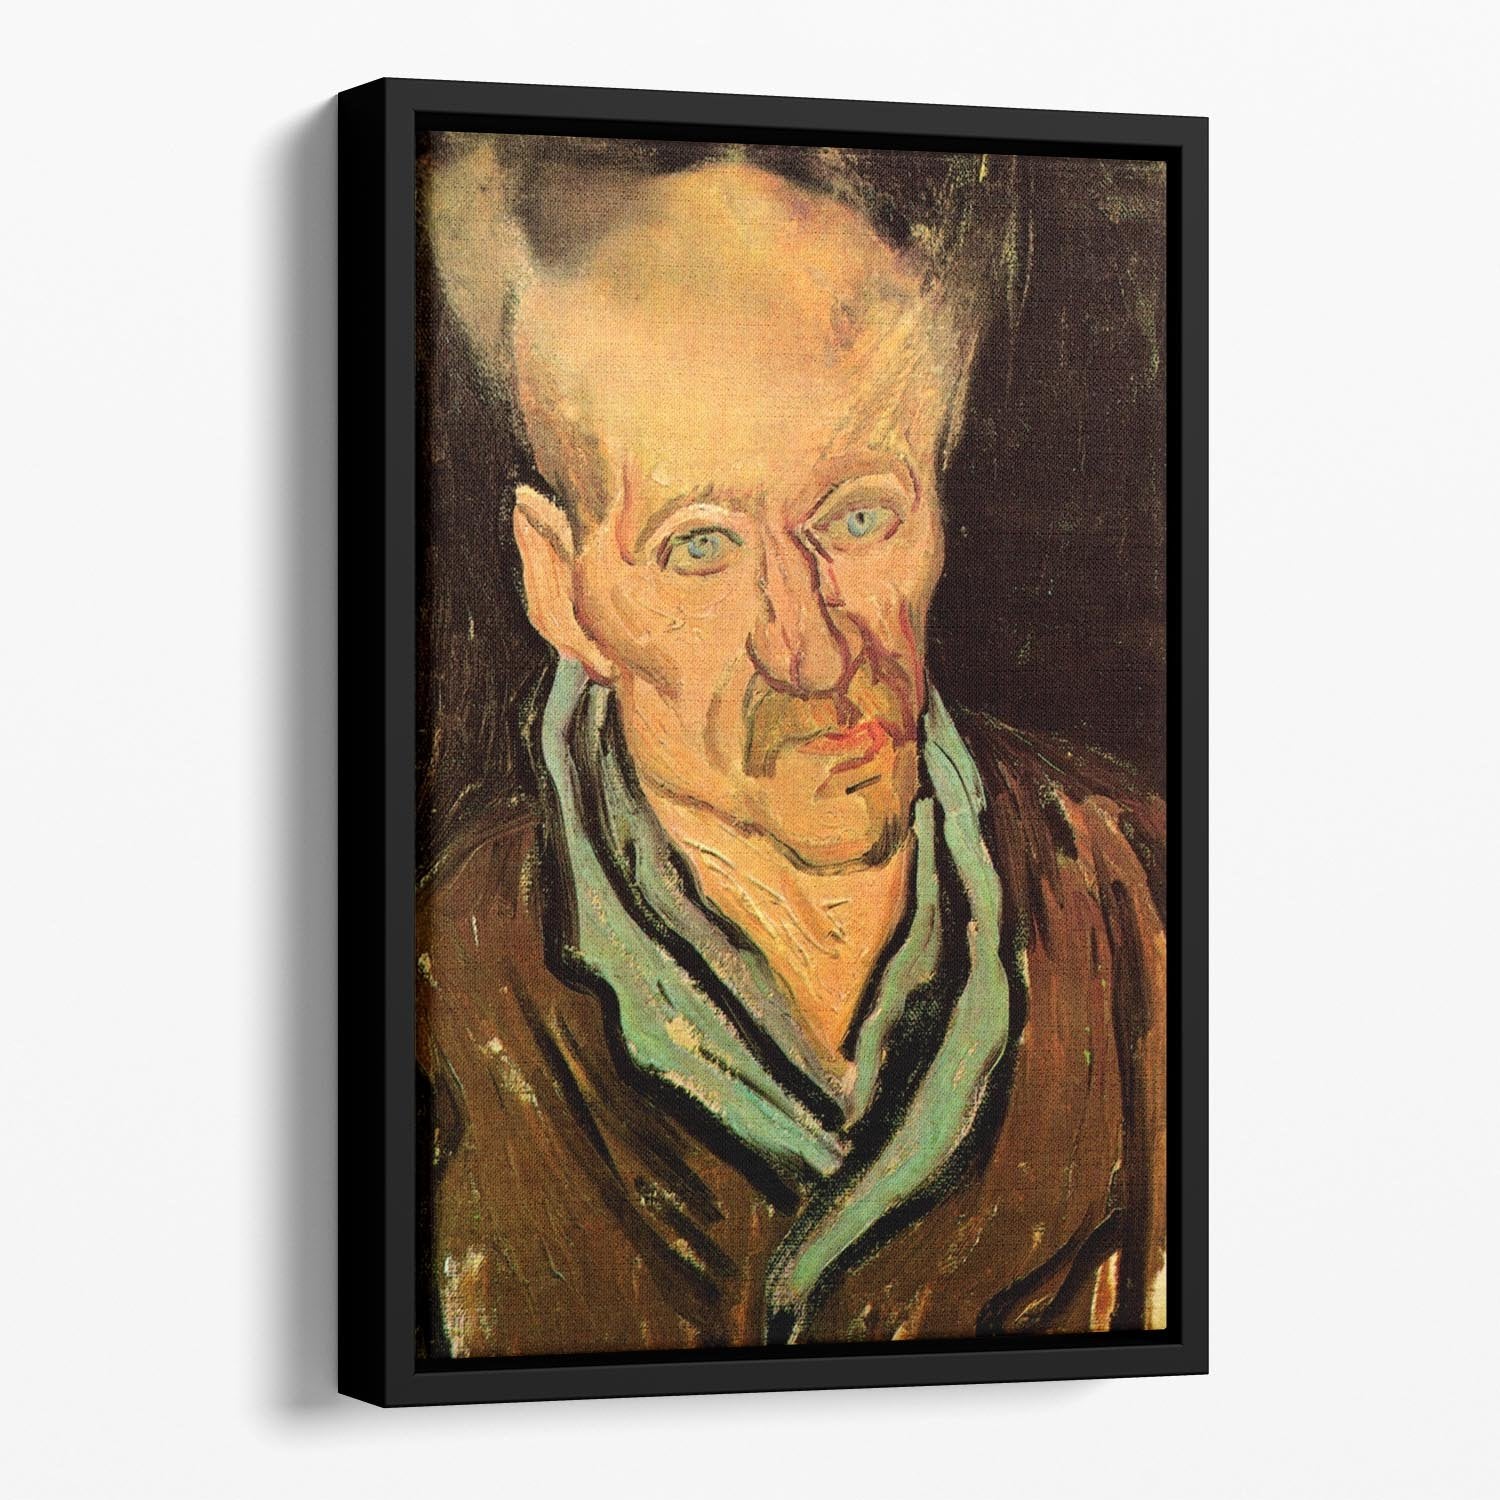 Portrait of a Patient in Saint-Paul Hospital by Van Gogh Floating Framed Canvas